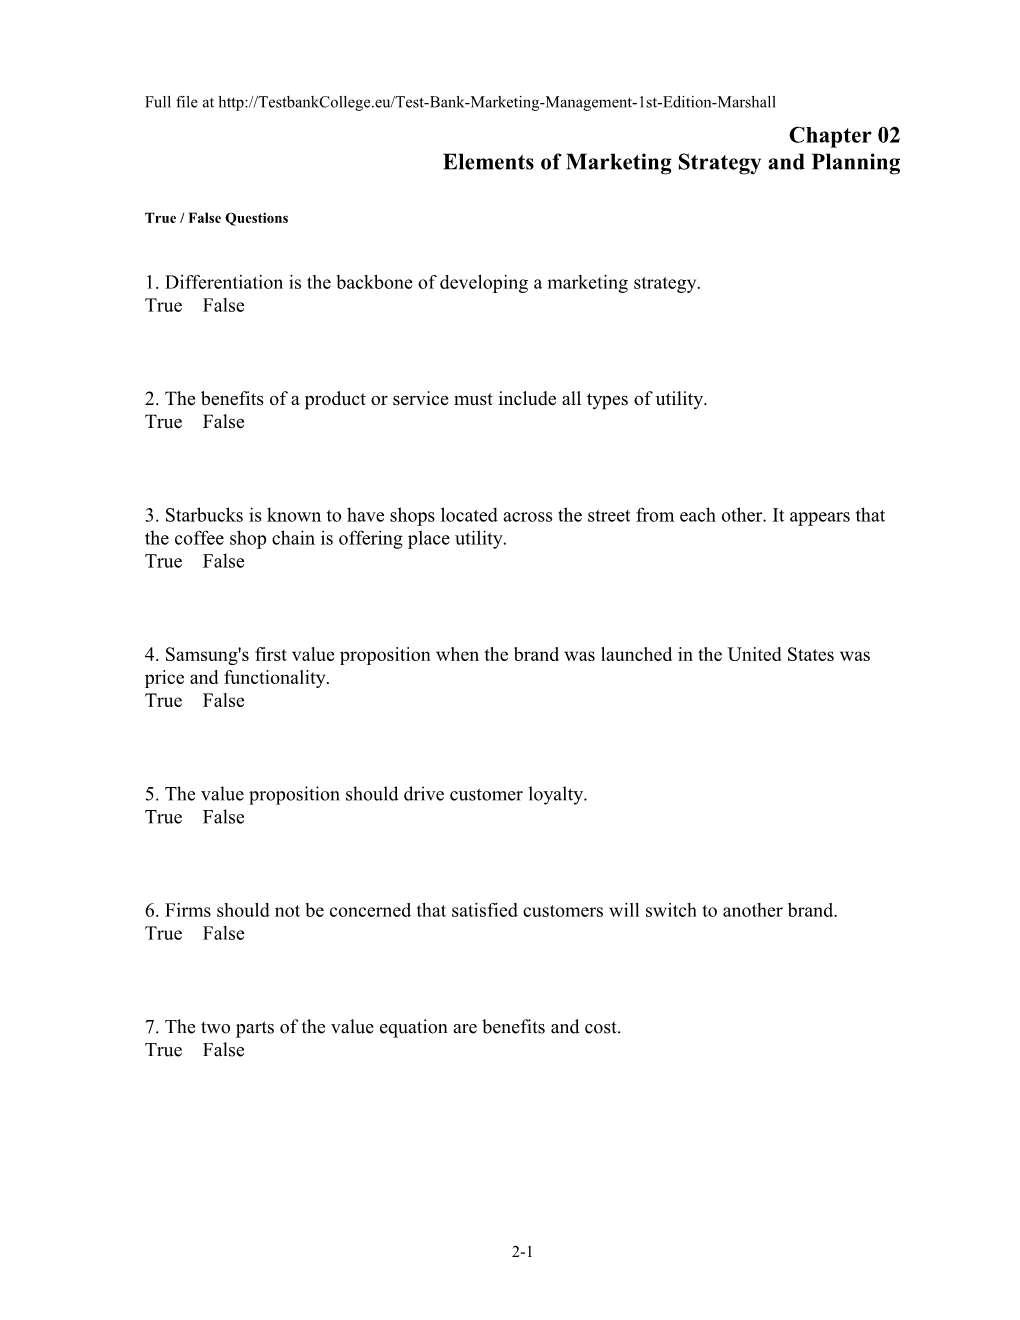 Chapter 02 Elements of Marketing Strategy and Planning